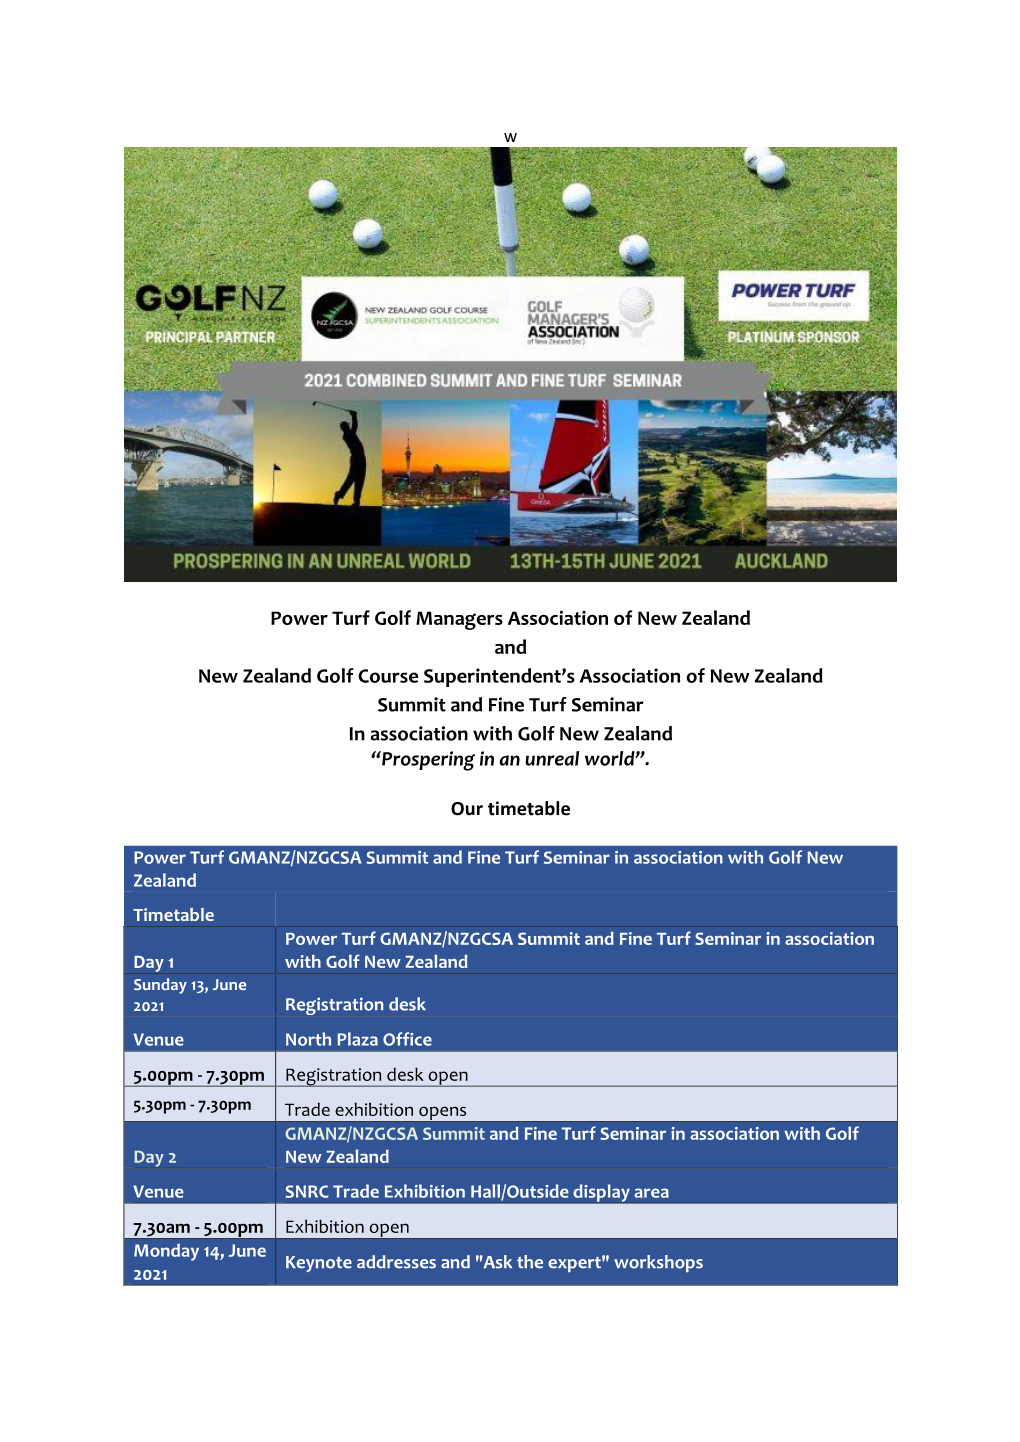 Power Turf Golf Managers Association of New Zealand and New